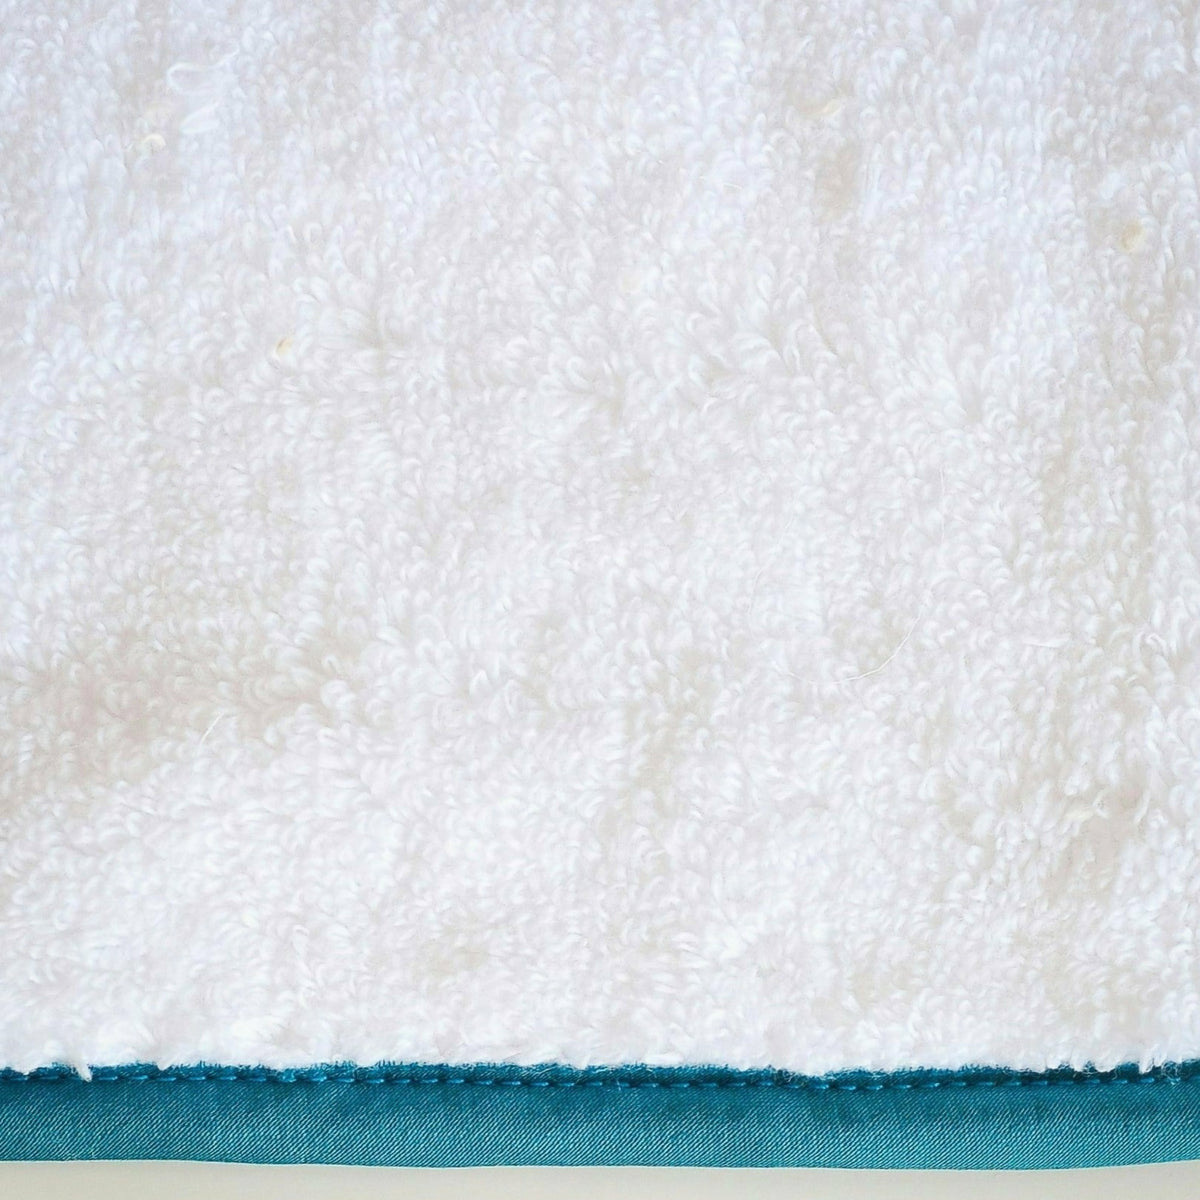 Home Treasures Bodrum Bath Towel Swatch White/Teal Fine Linens